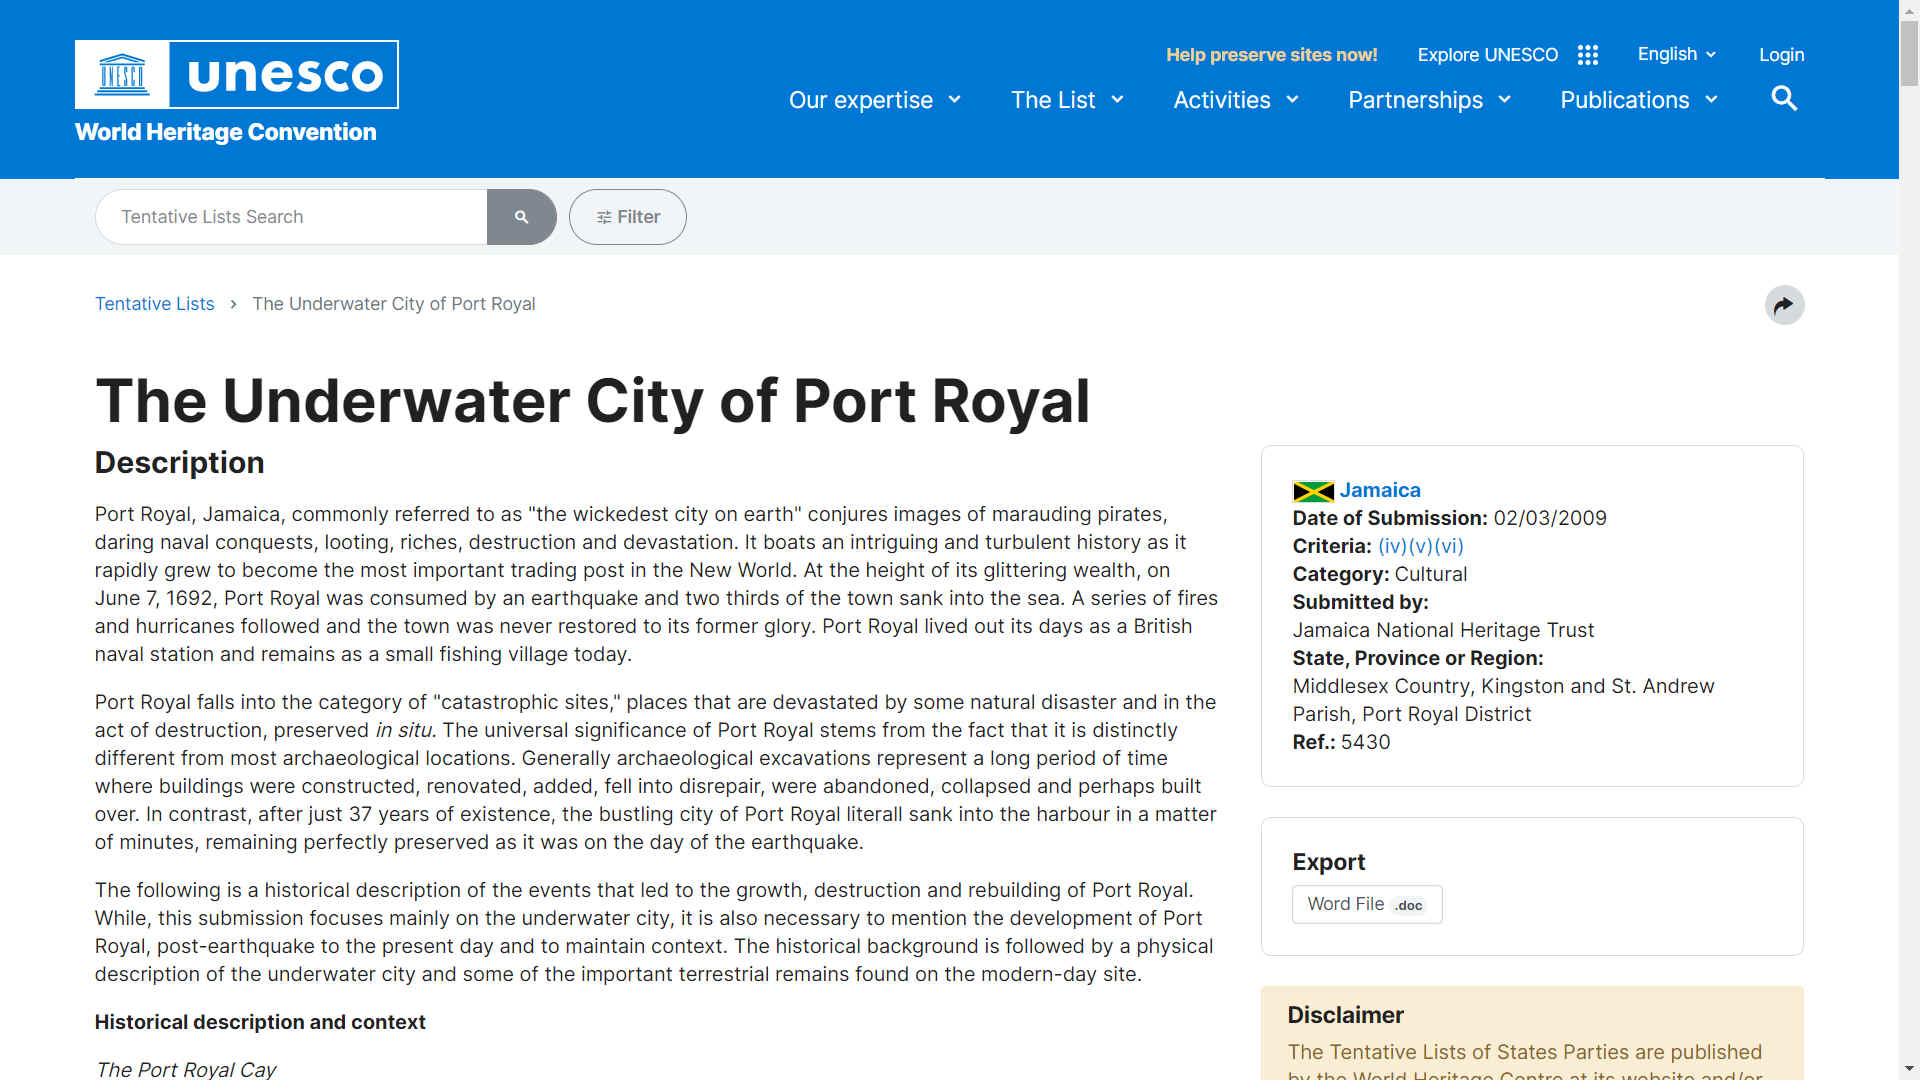 The underwater city of Port Royal is a World Heritage Site contender